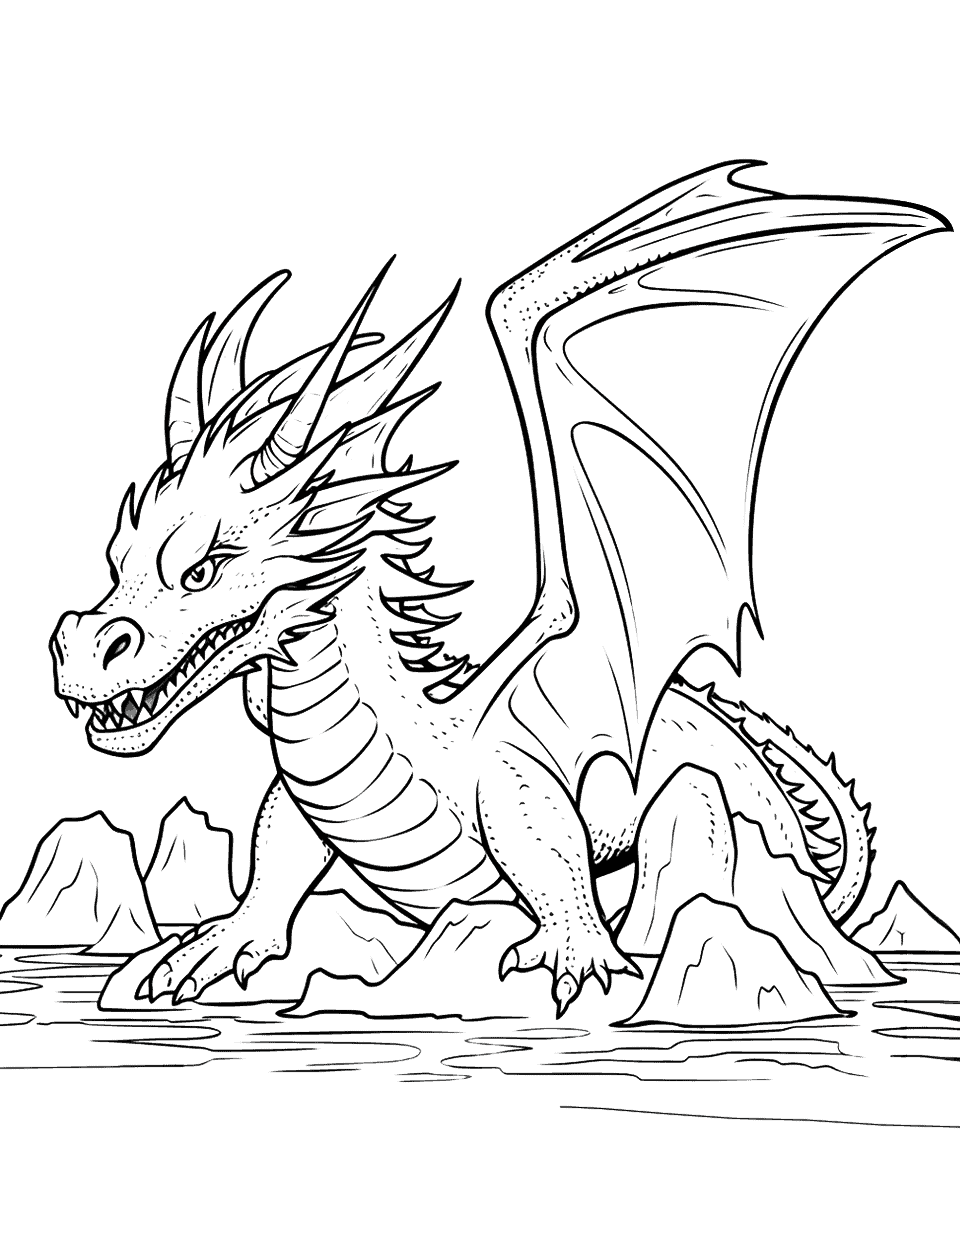 Ice Dragon Coloring Page - An ice dragon, standing on top of a freezing lake.